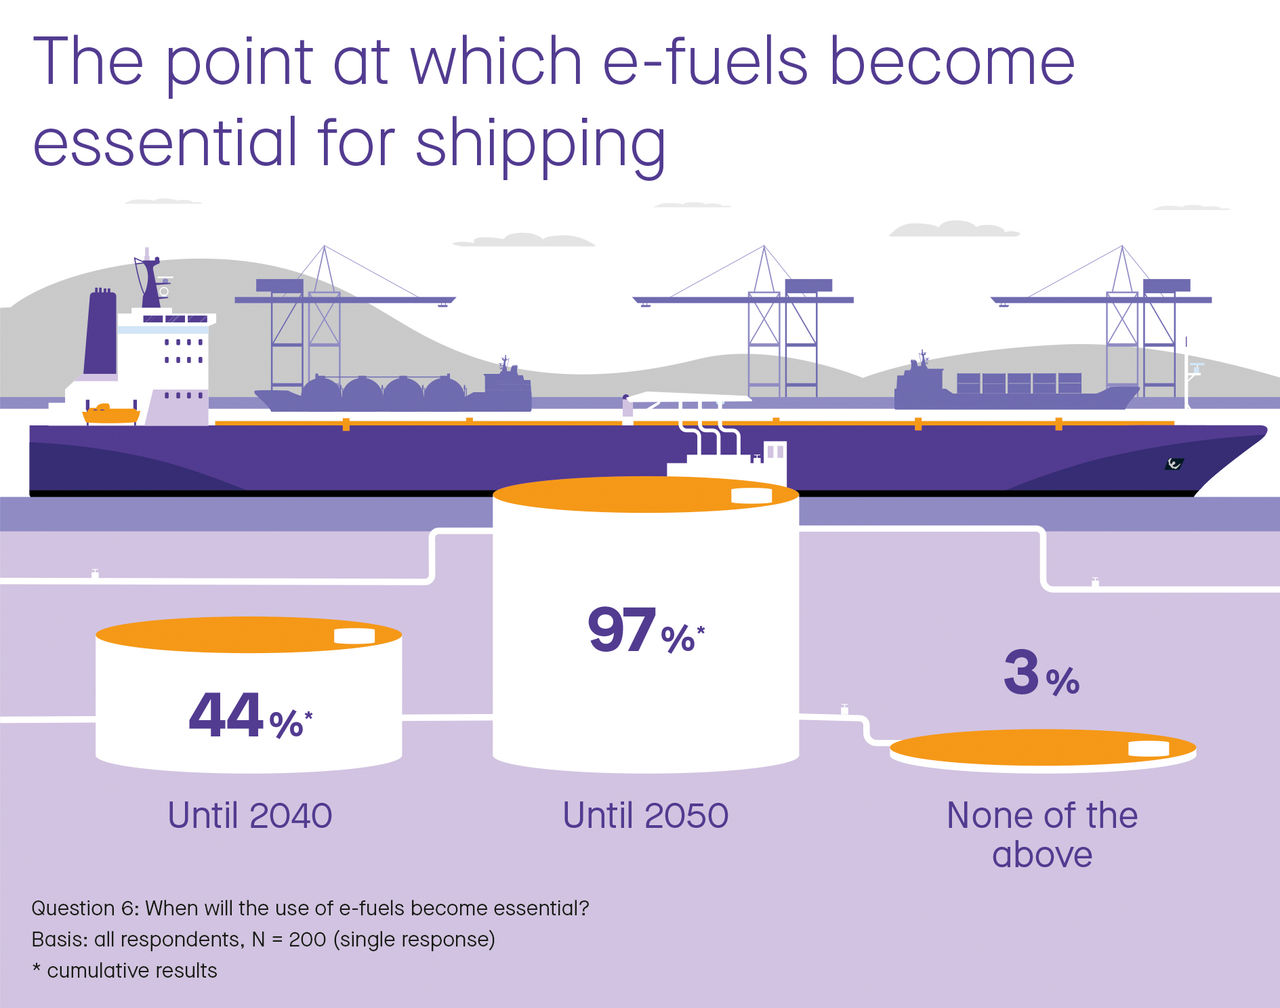 Close to half of the respondents estimate that e-fuels will become essential for shipping by 2040, and the vast majority is convinced e-fuels will be essential by 2050 (cumulative depiction).